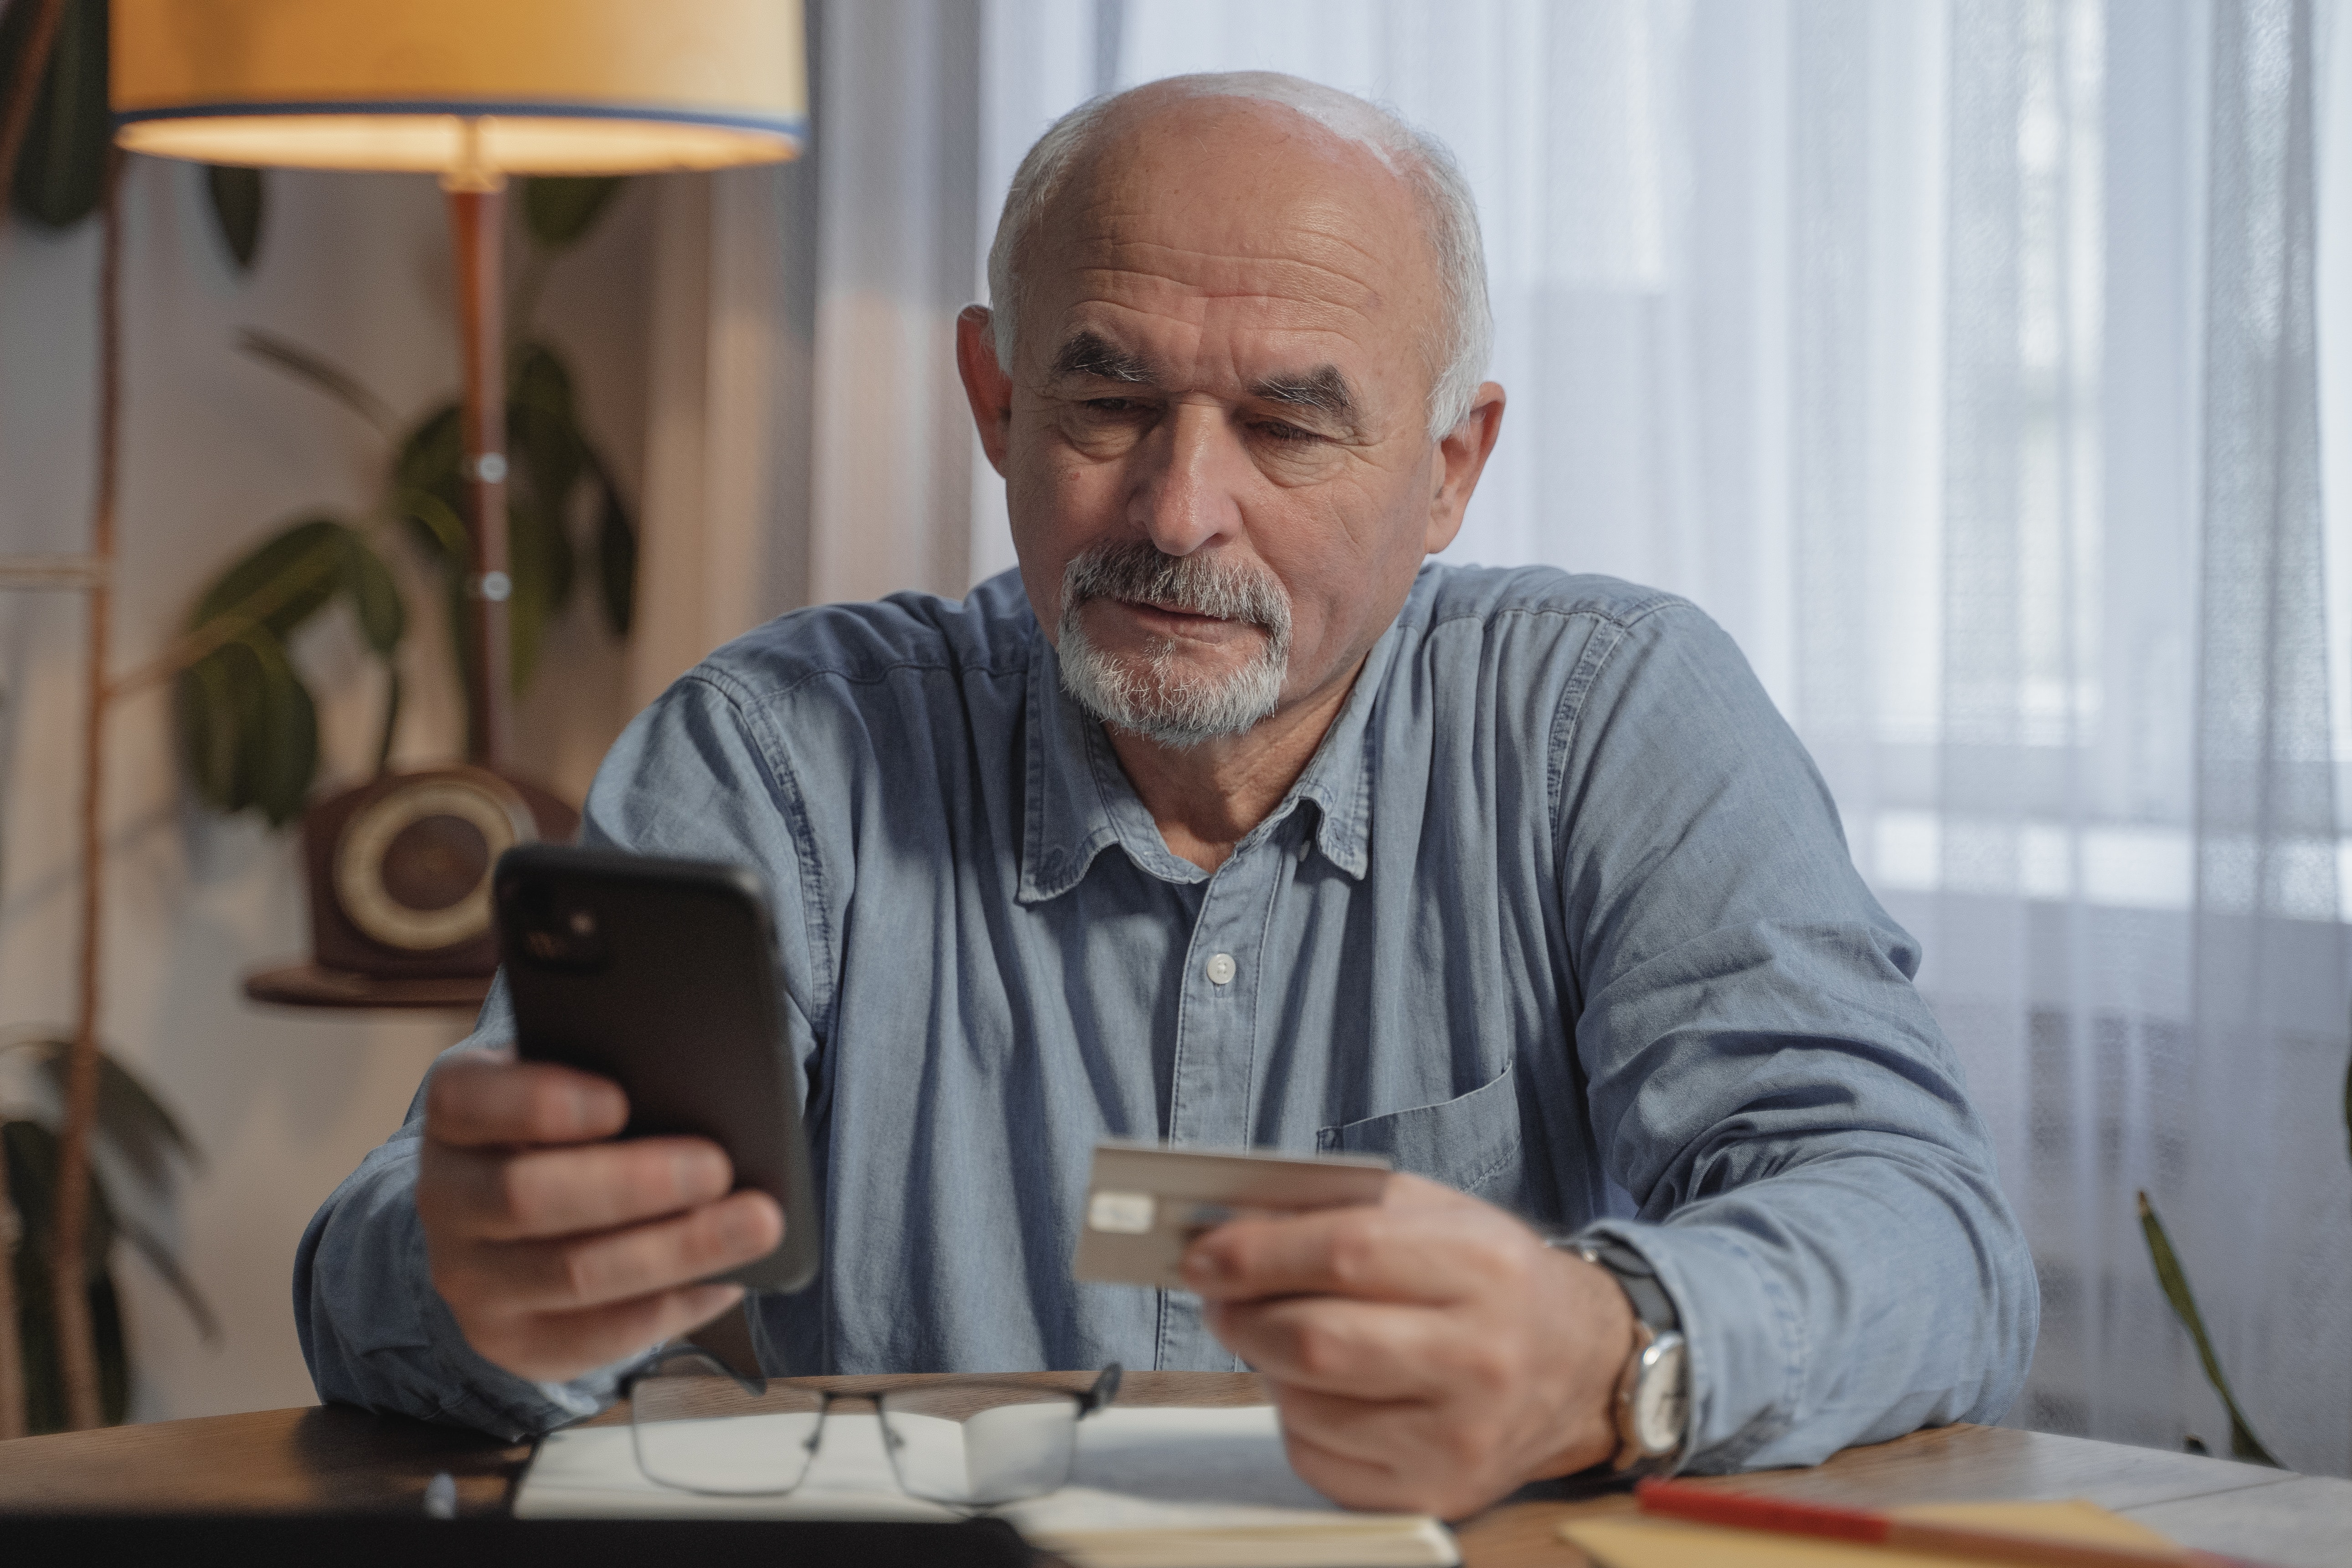 Older Man Looking at Phone and Debit Card